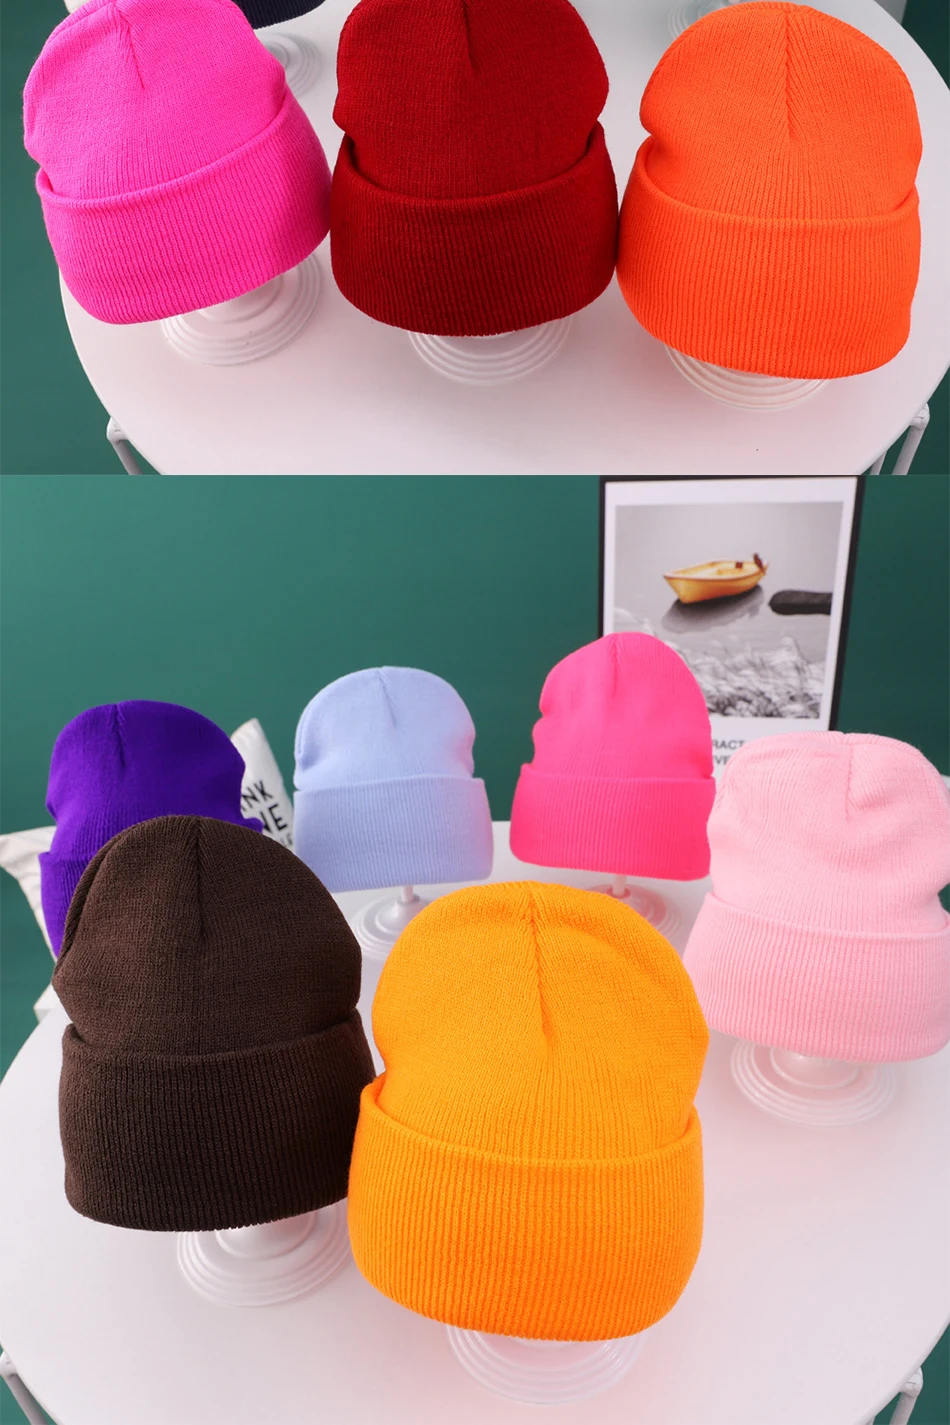 Fashion Winter Baby Beanies Hat Knitted Fluorescent Multicolor Skullies Knit Hats Kids Girls Boys Bonnet Autumn Warm Beanie Caps baby accessories carry bag	